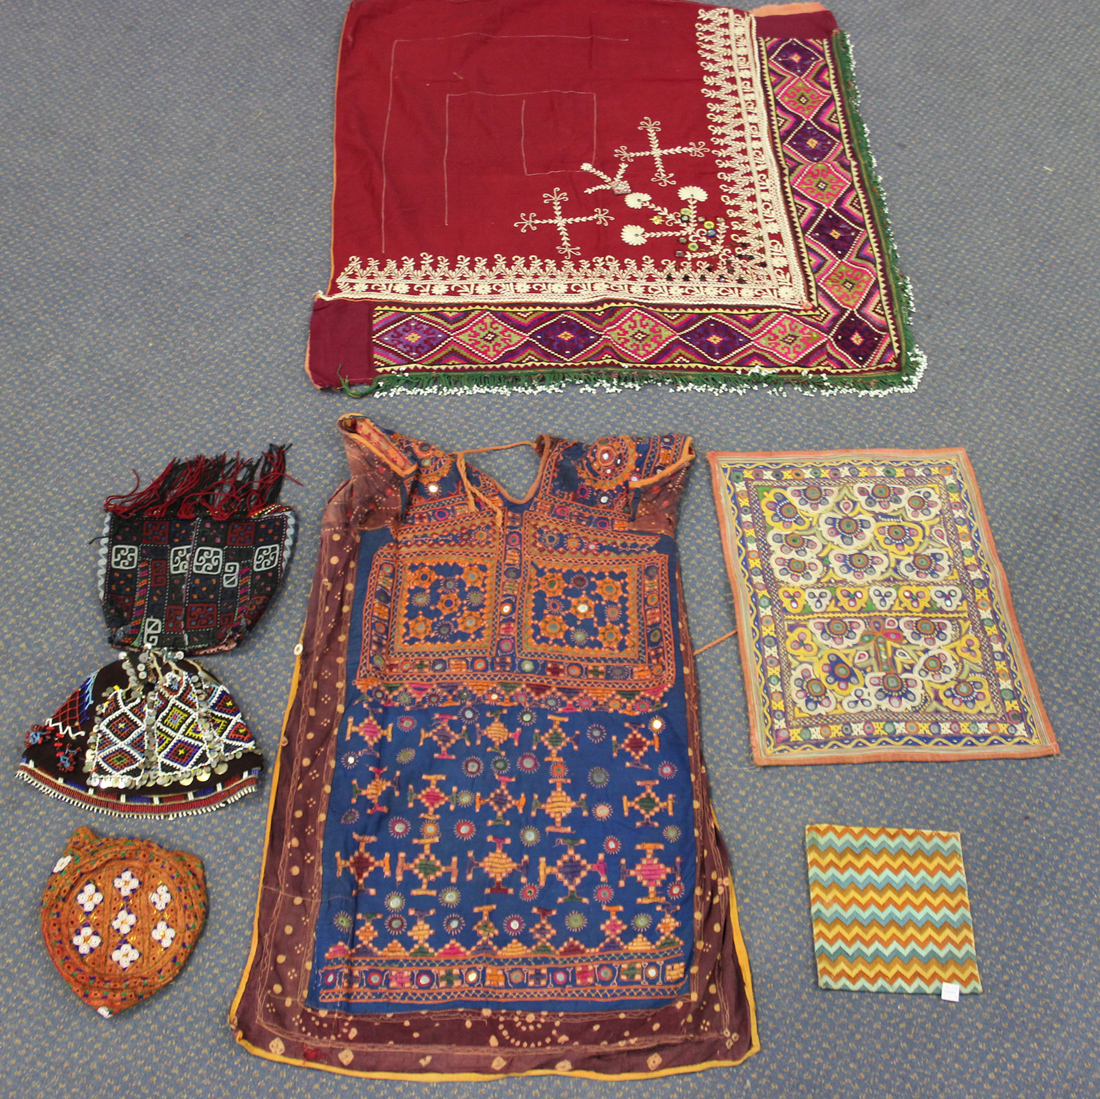 A quantity of mostly 20th century Indian needlework textiles, including clothing and embroidered - Image 2 of 4